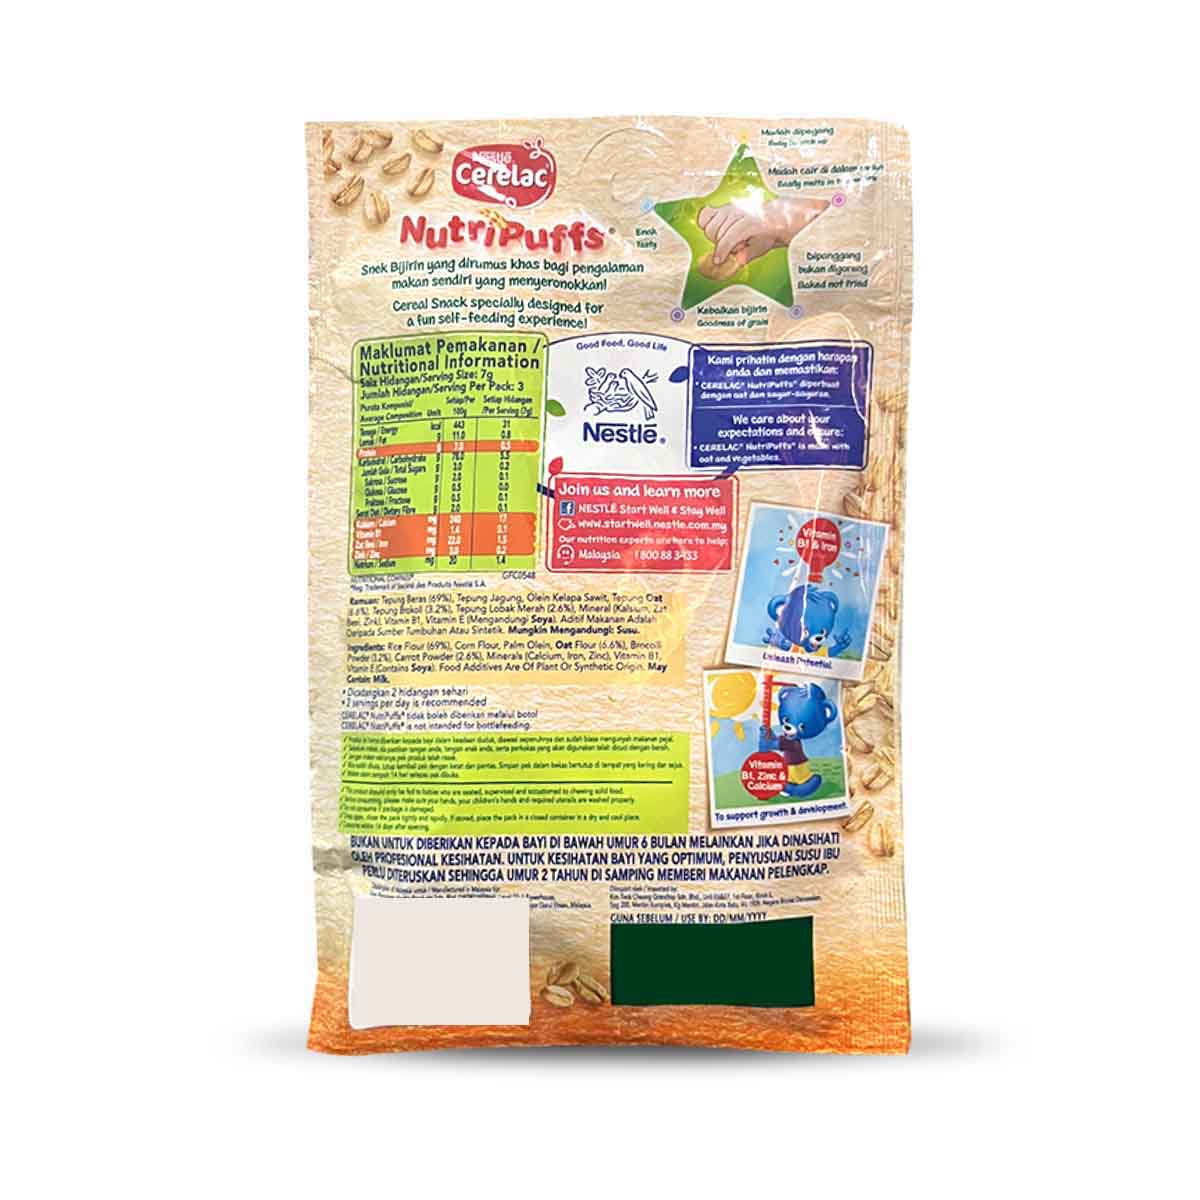 Buy Nestle Cerelac Nutri Puffs with Broccoli & Carrot - 25gms Online in India at uyyaala.com